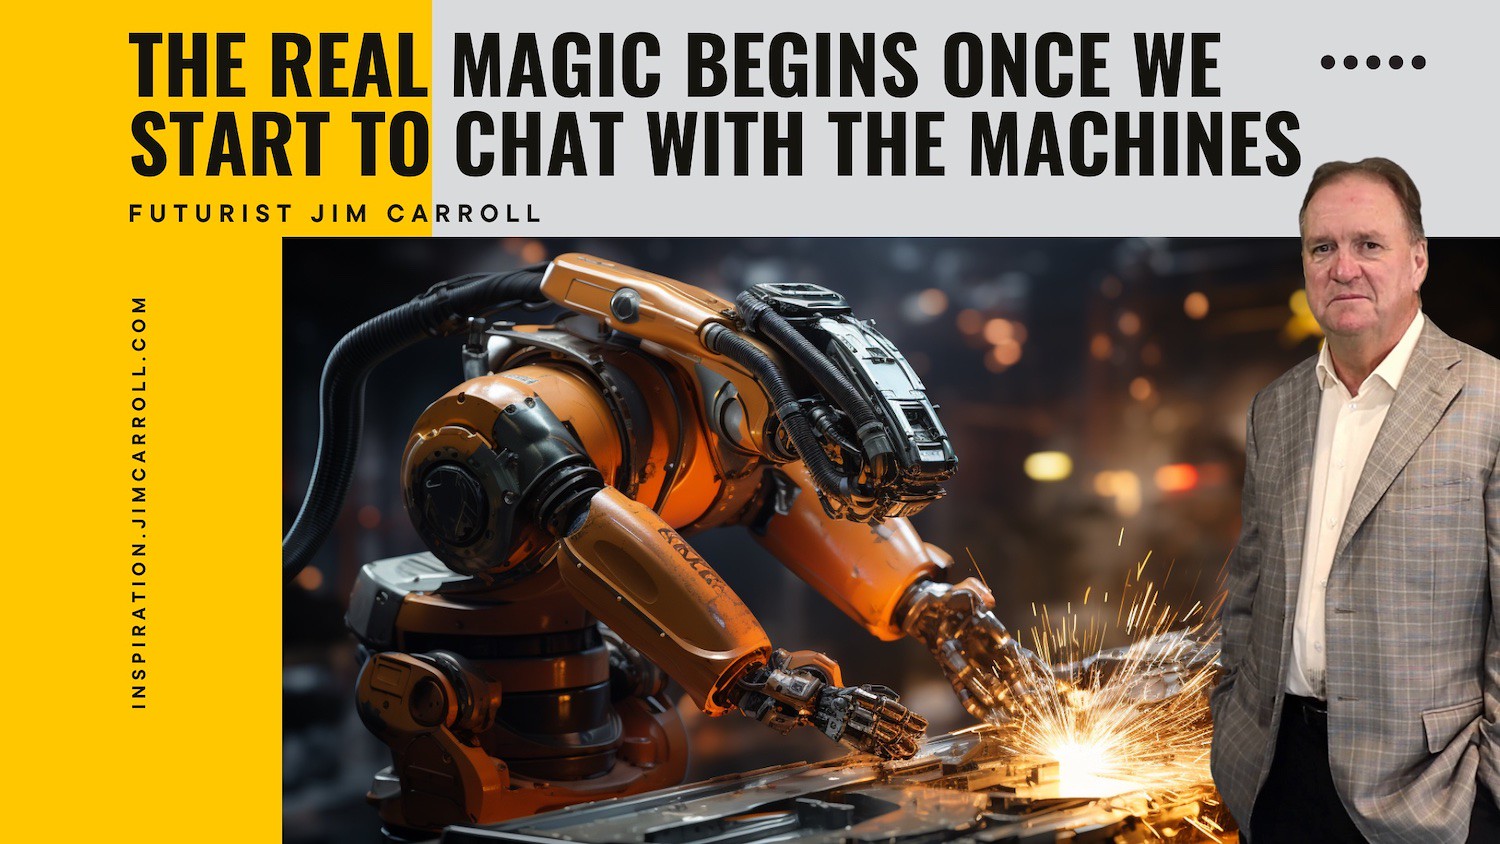 "The real magic begins once we start to chat with the machines" - Futurist Jim Carroll